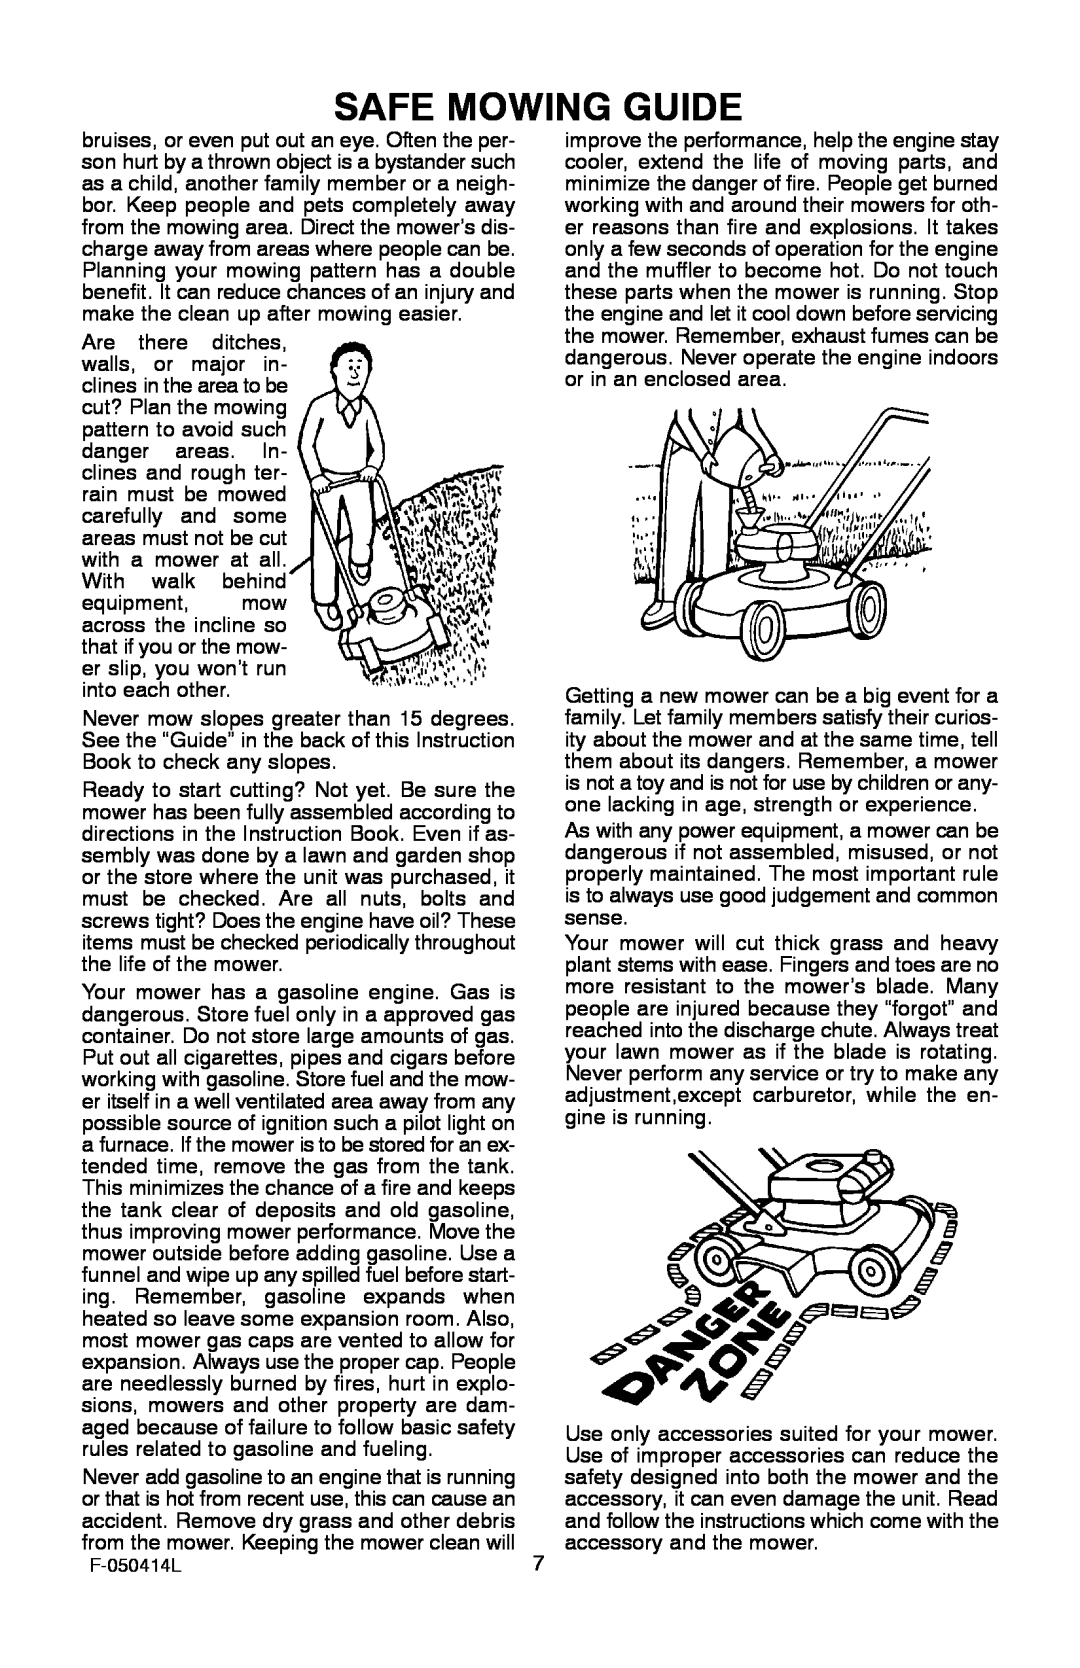 Adams 22 manual Safe Mowing Guide, bruises, or even put out an eye. Often the per 